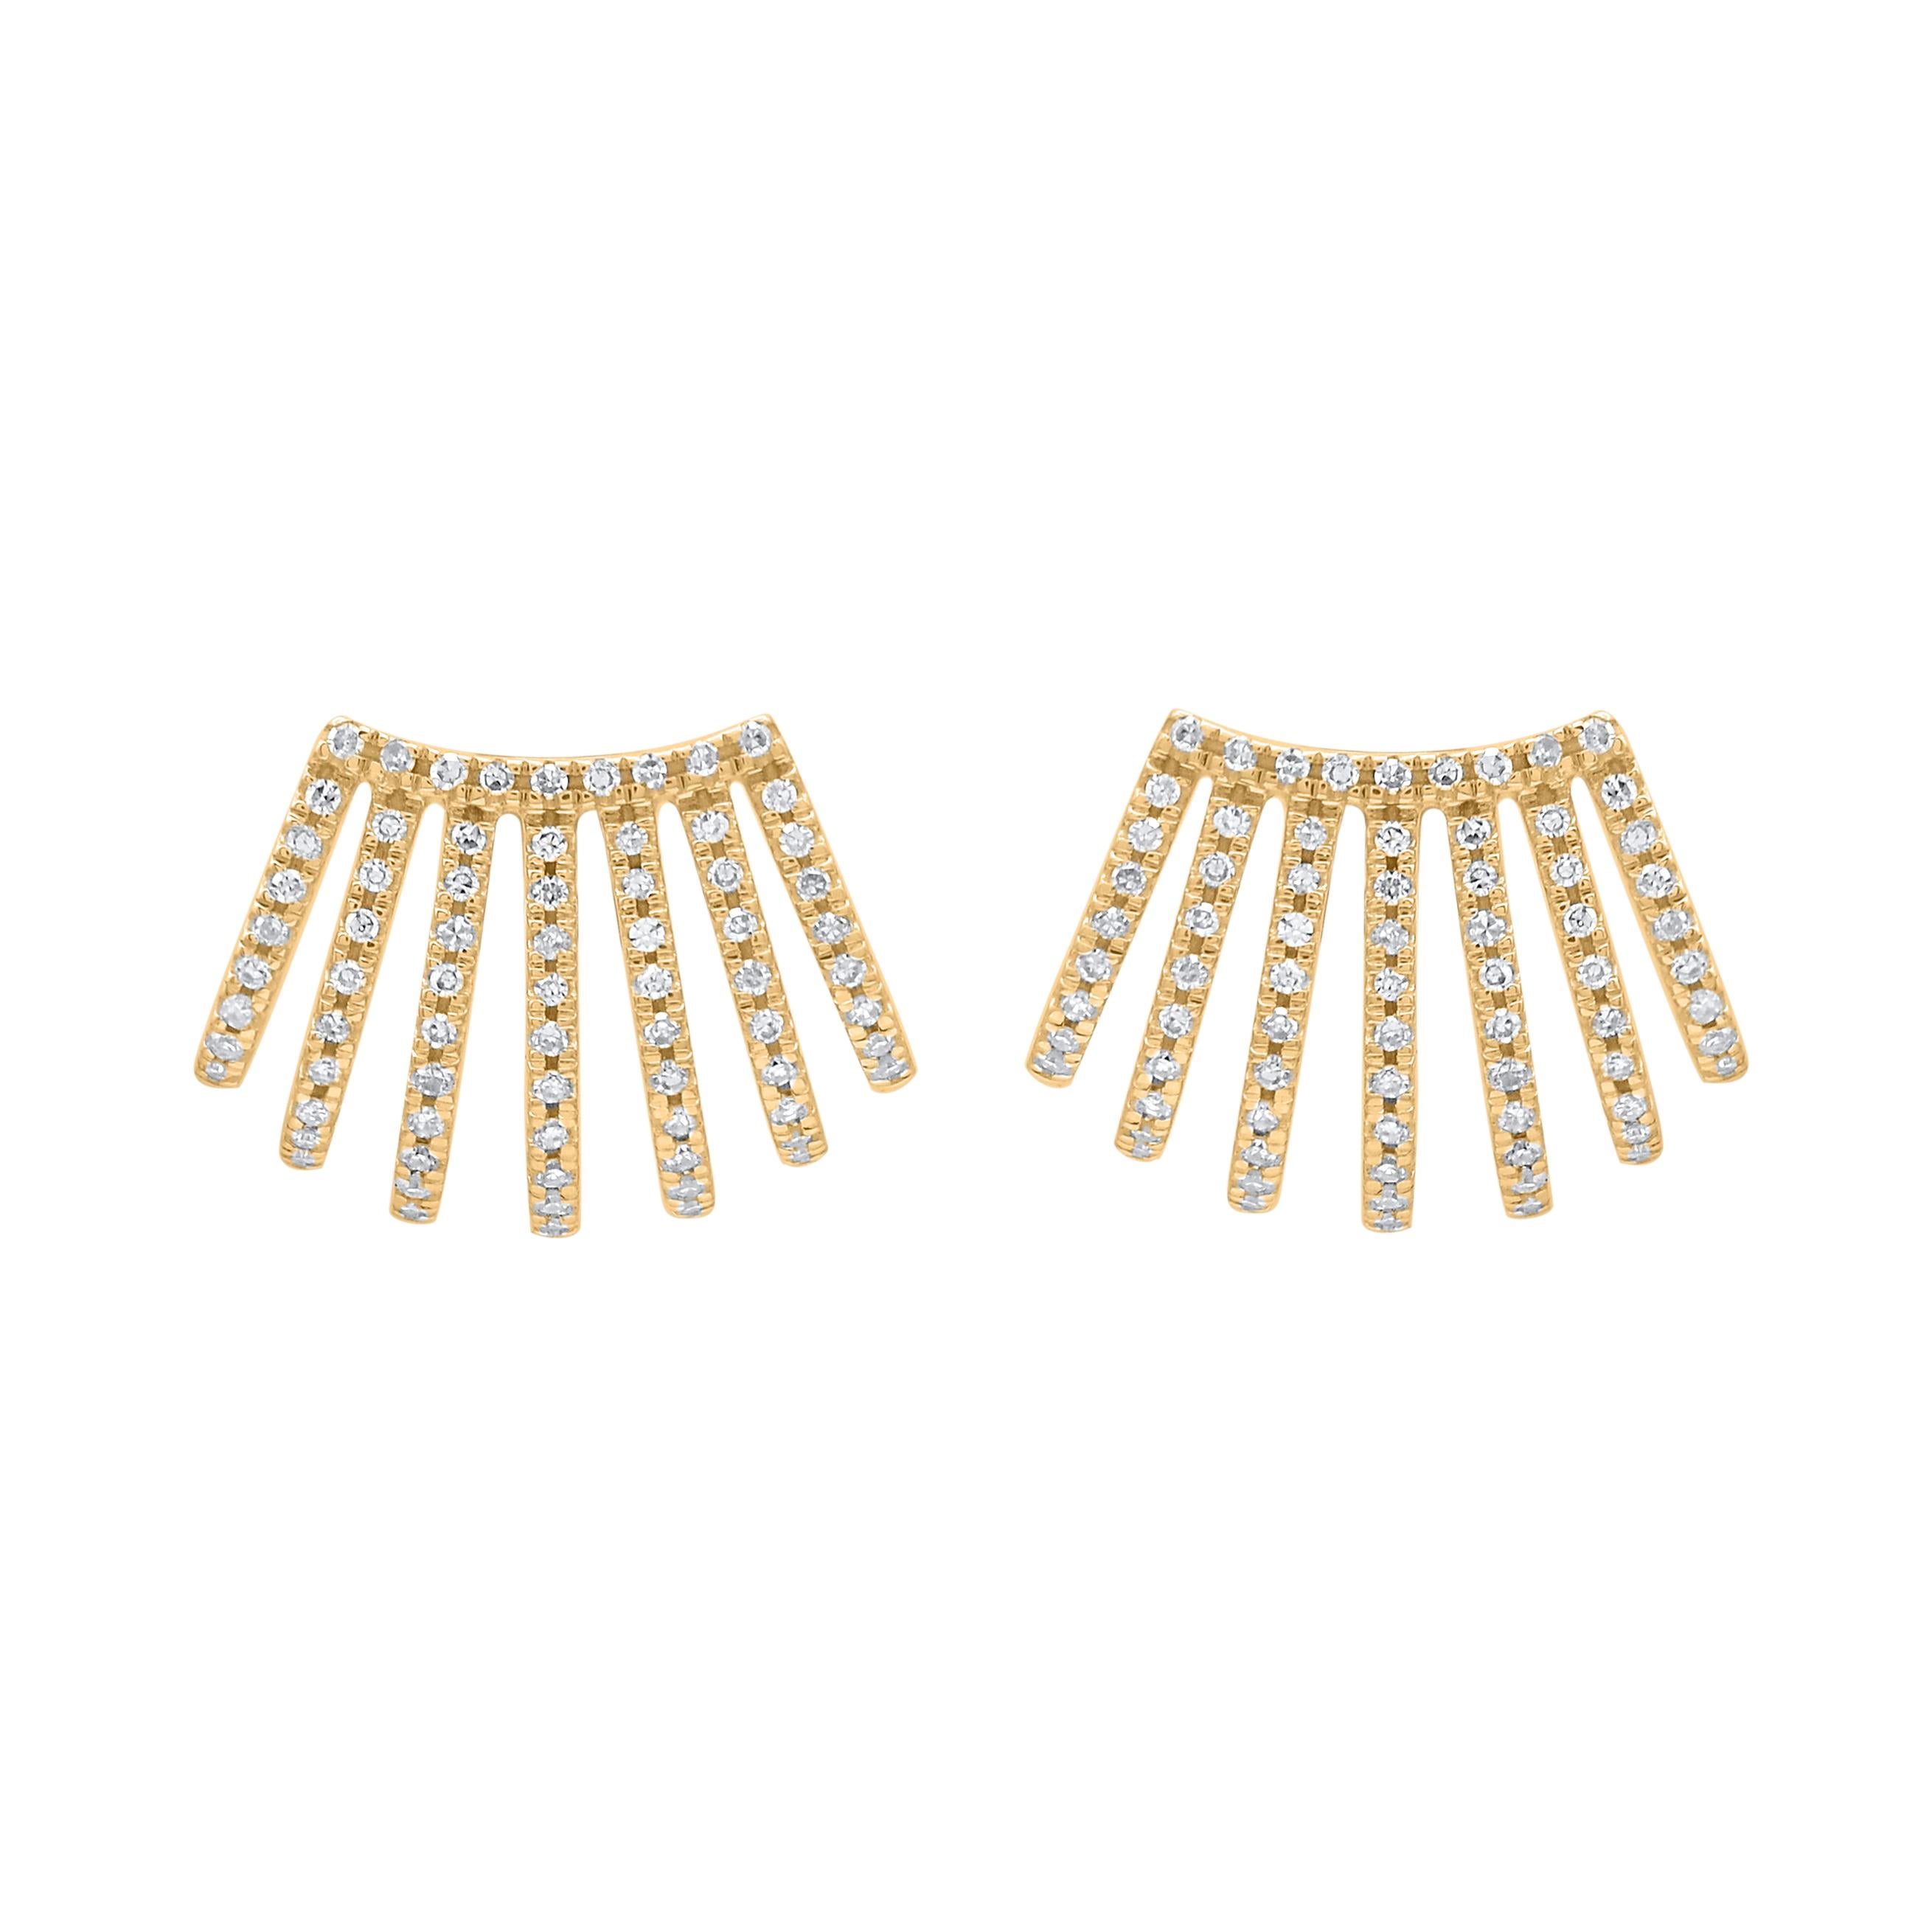 You'll adore the petite touch of shimmer these designer stud earrings add to your attire. Beautifully hand-crafted by our inhouse experts in 18 karat yellow gold and embellished with 146 round diamonds set in prong setting and shimmers with H-I